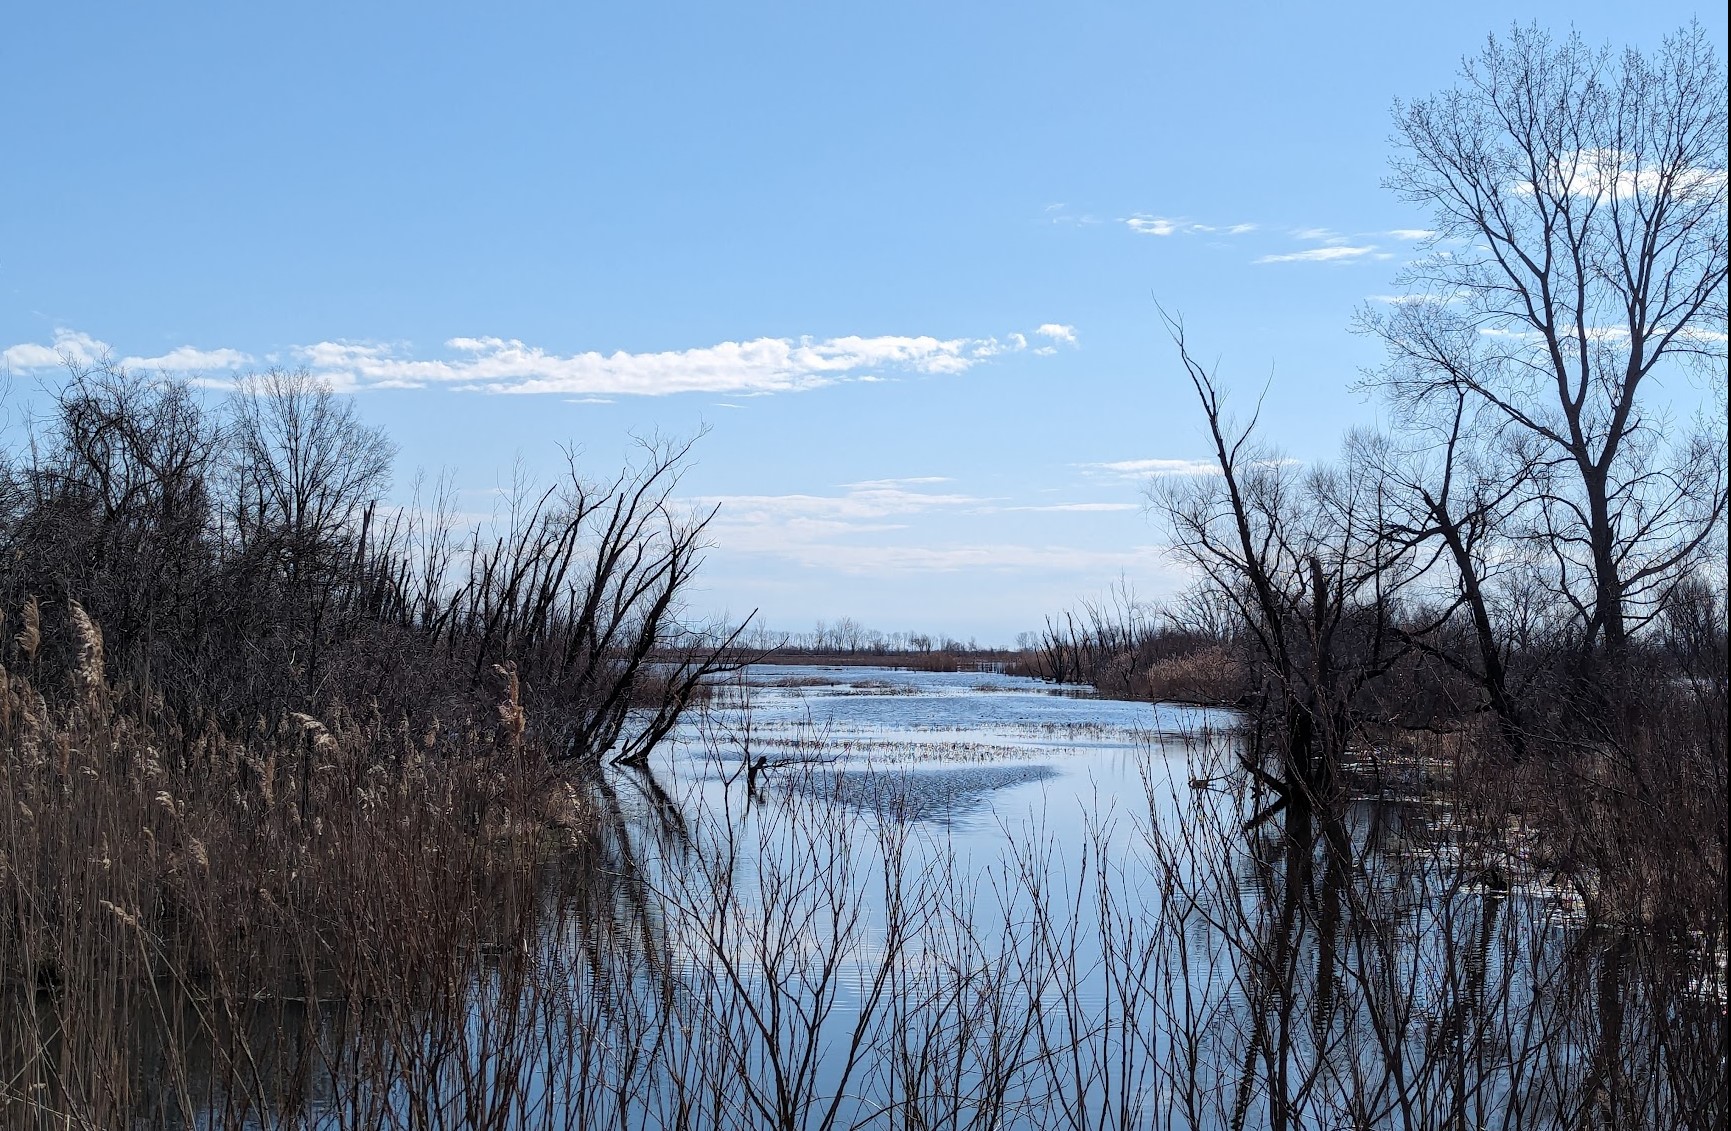 A photo of Hillman Marsh, showing a waterway surrounded by trees.